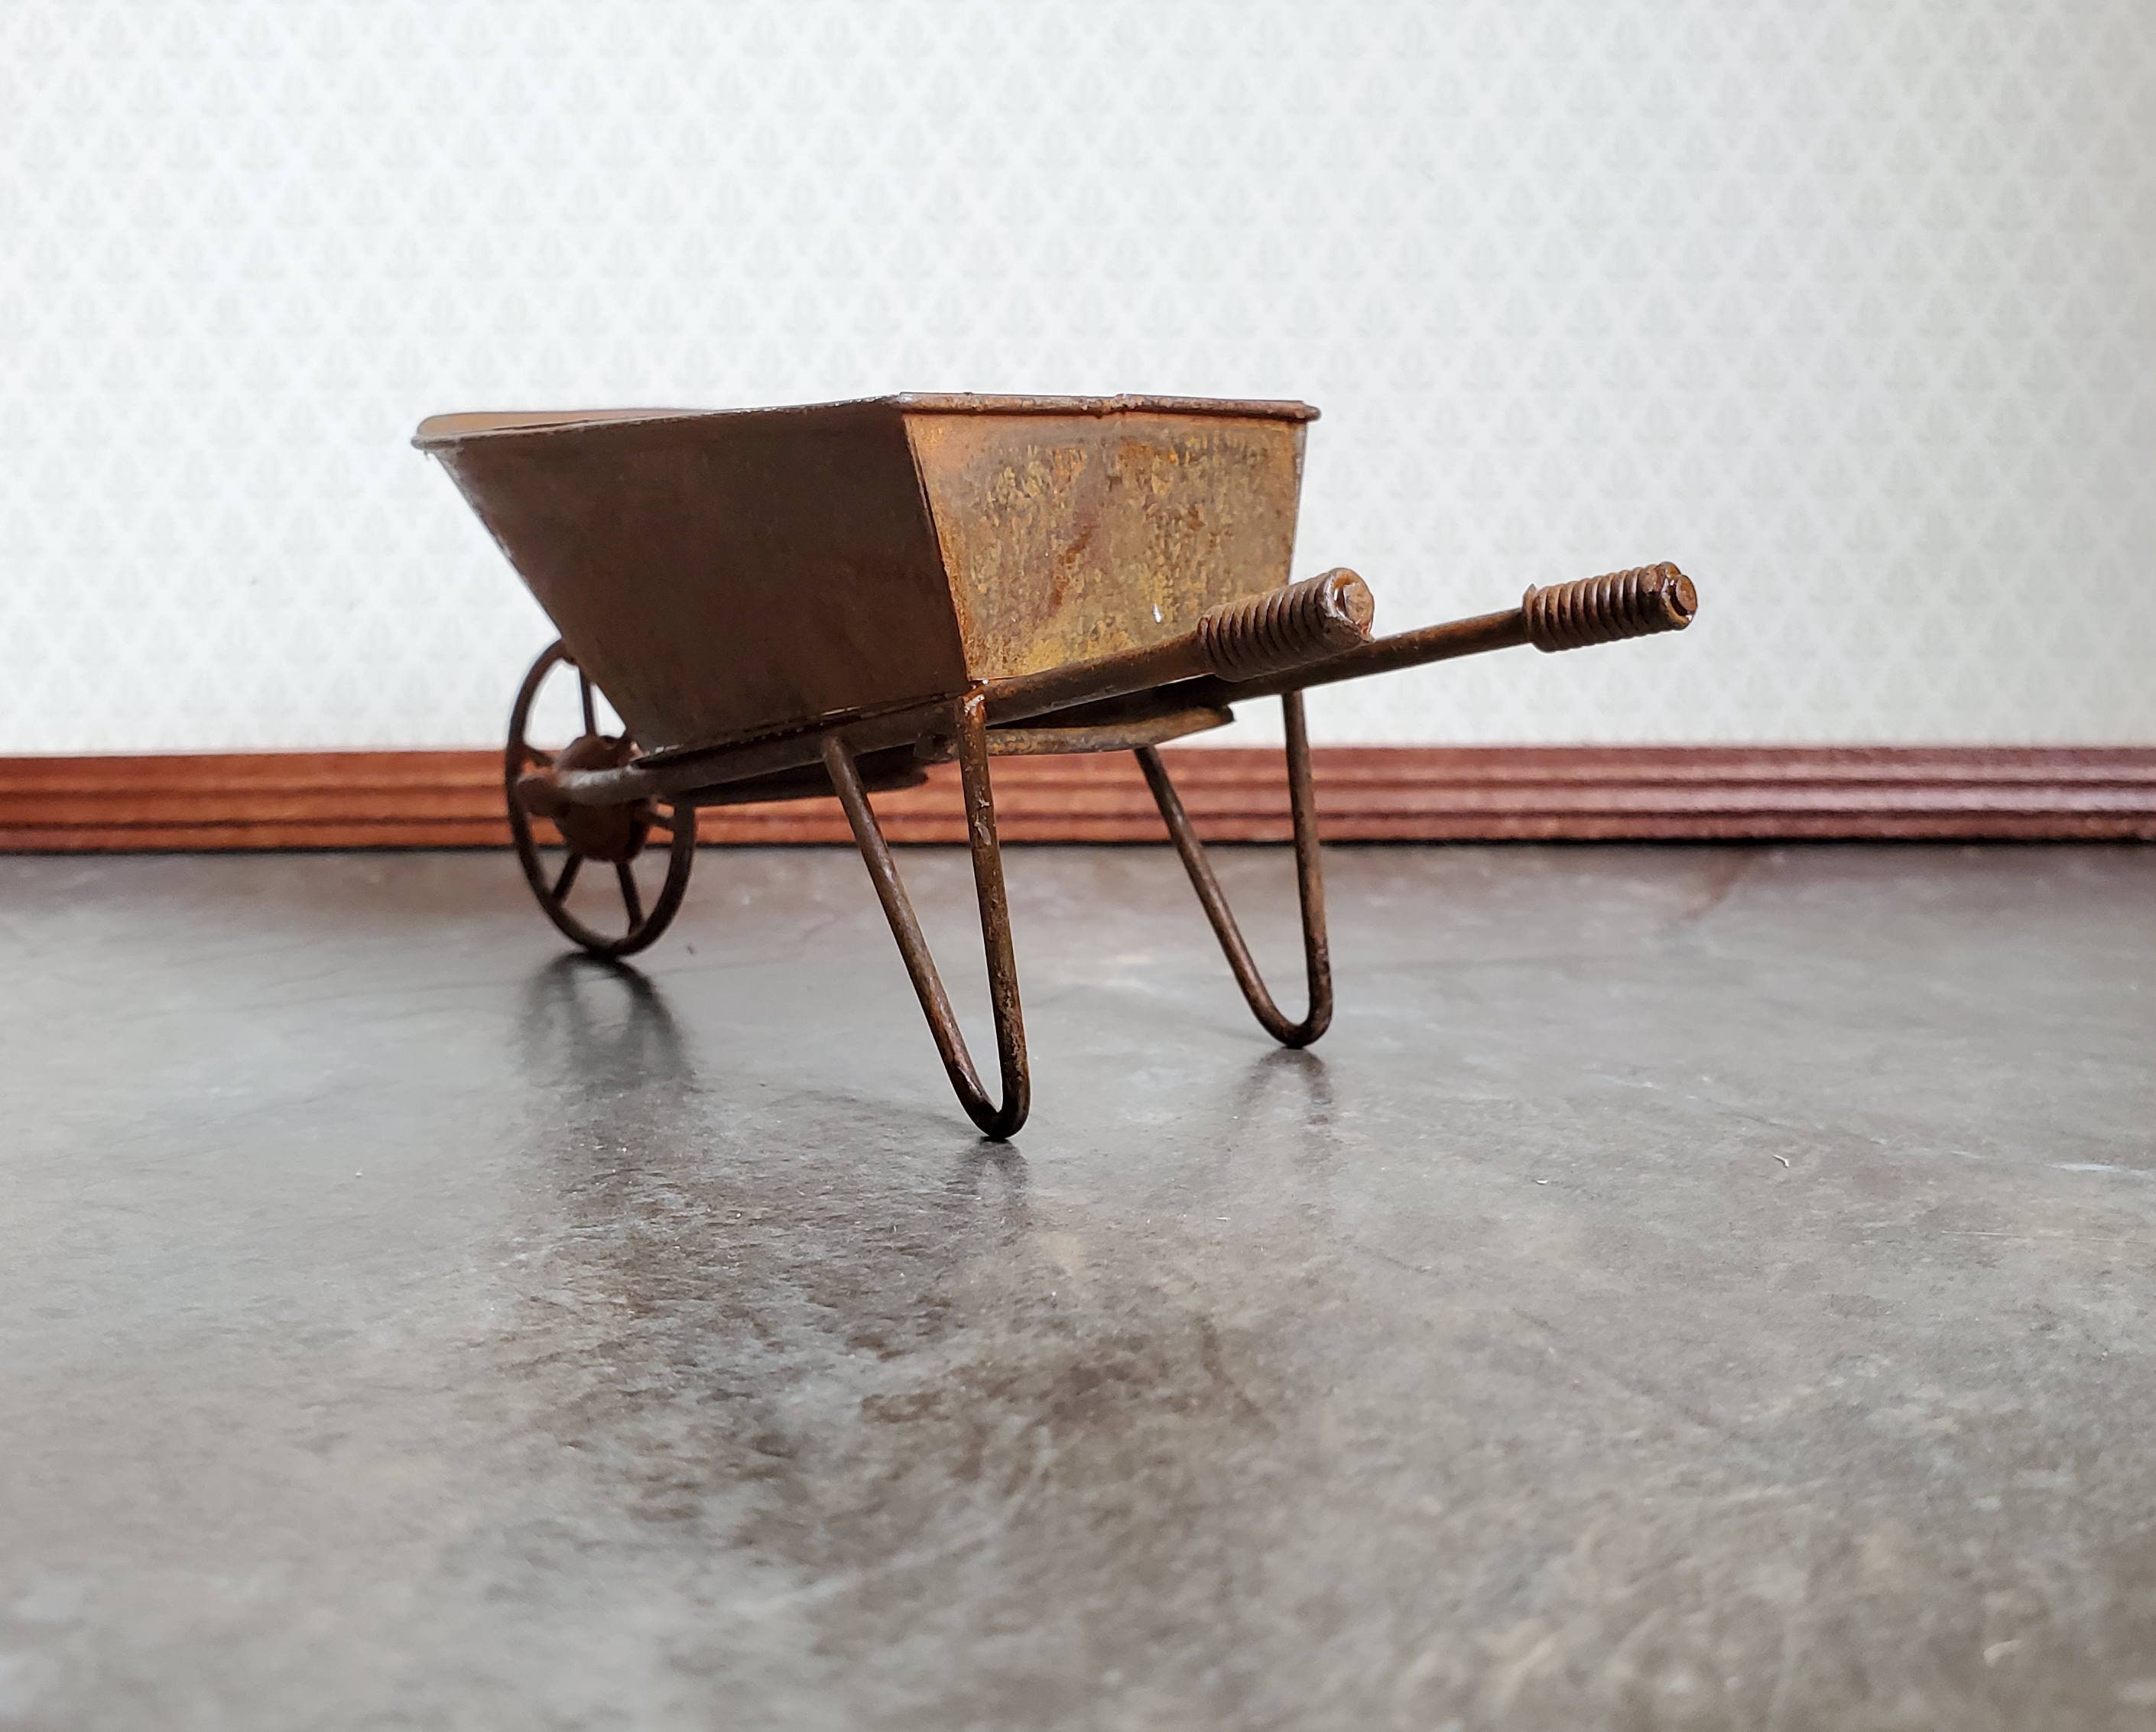 Dollhouse Miniature  Wheelbarrow Unfinished Handcrafted 1/12th Scale 